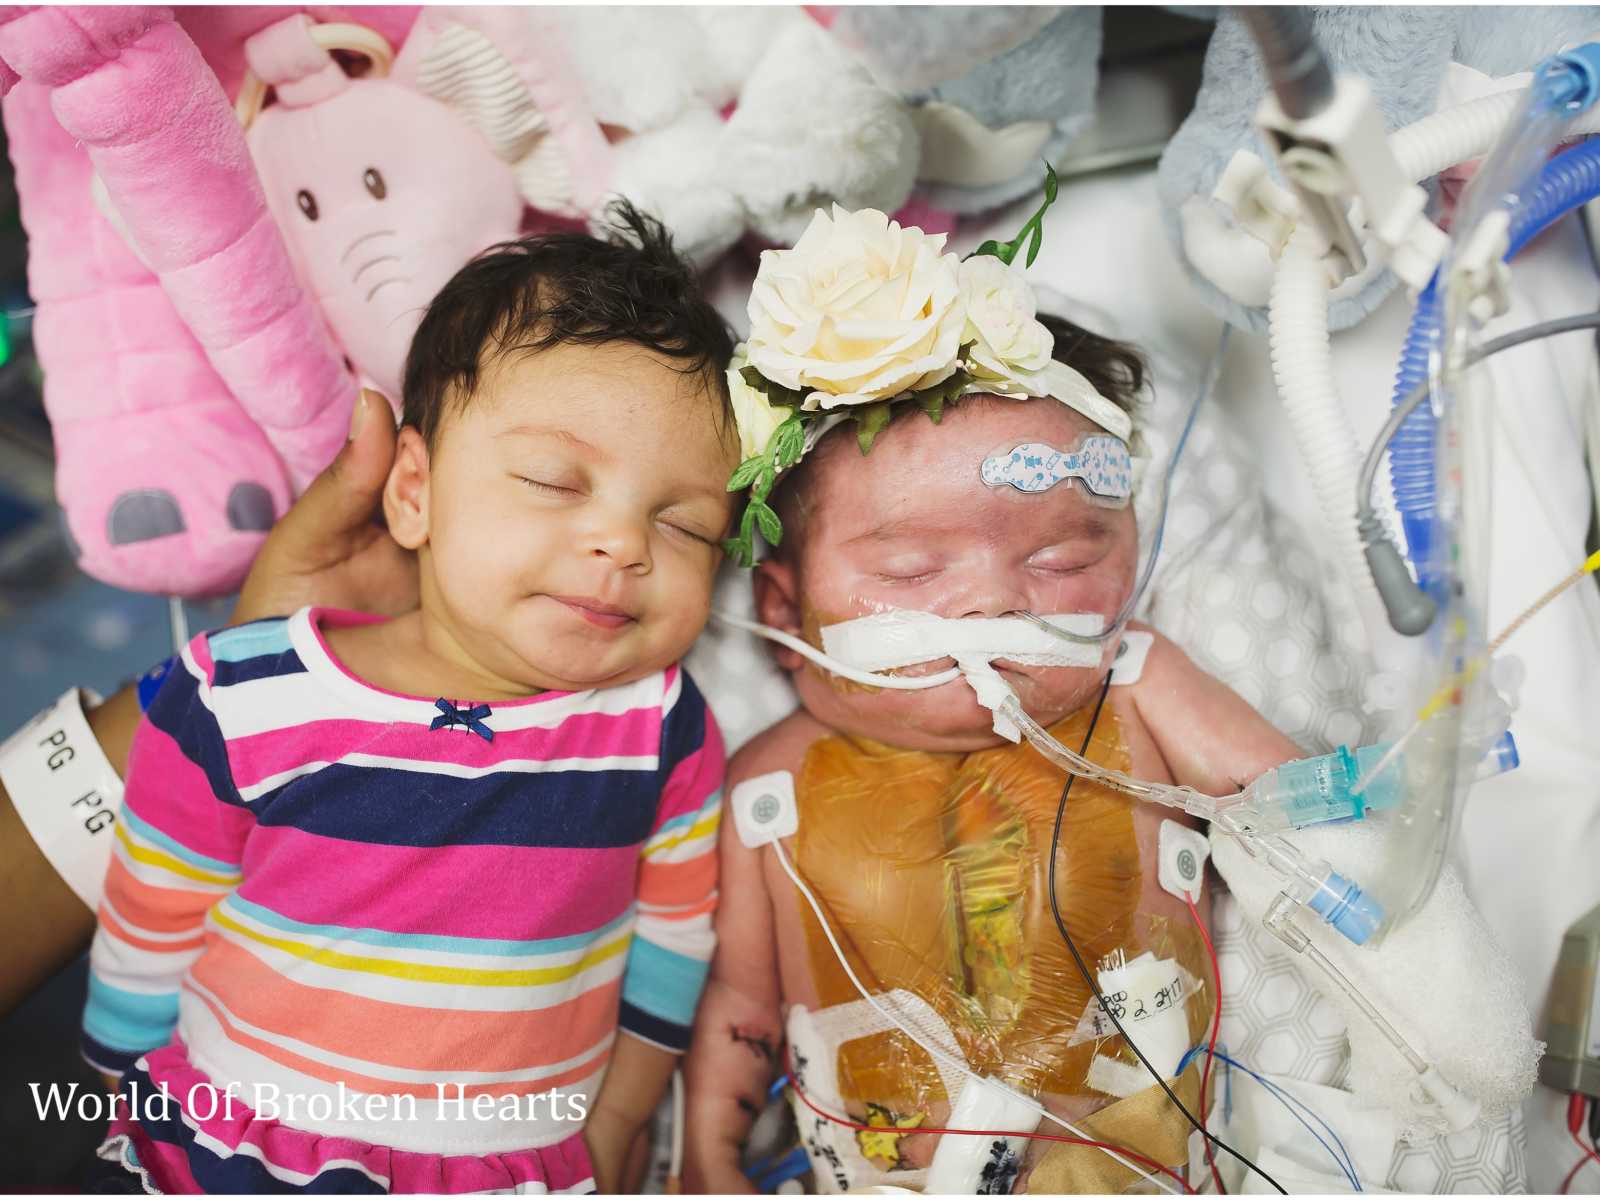 Twin sleeps next to twin with heart defect in hospital bed surrounded by stuffed animals